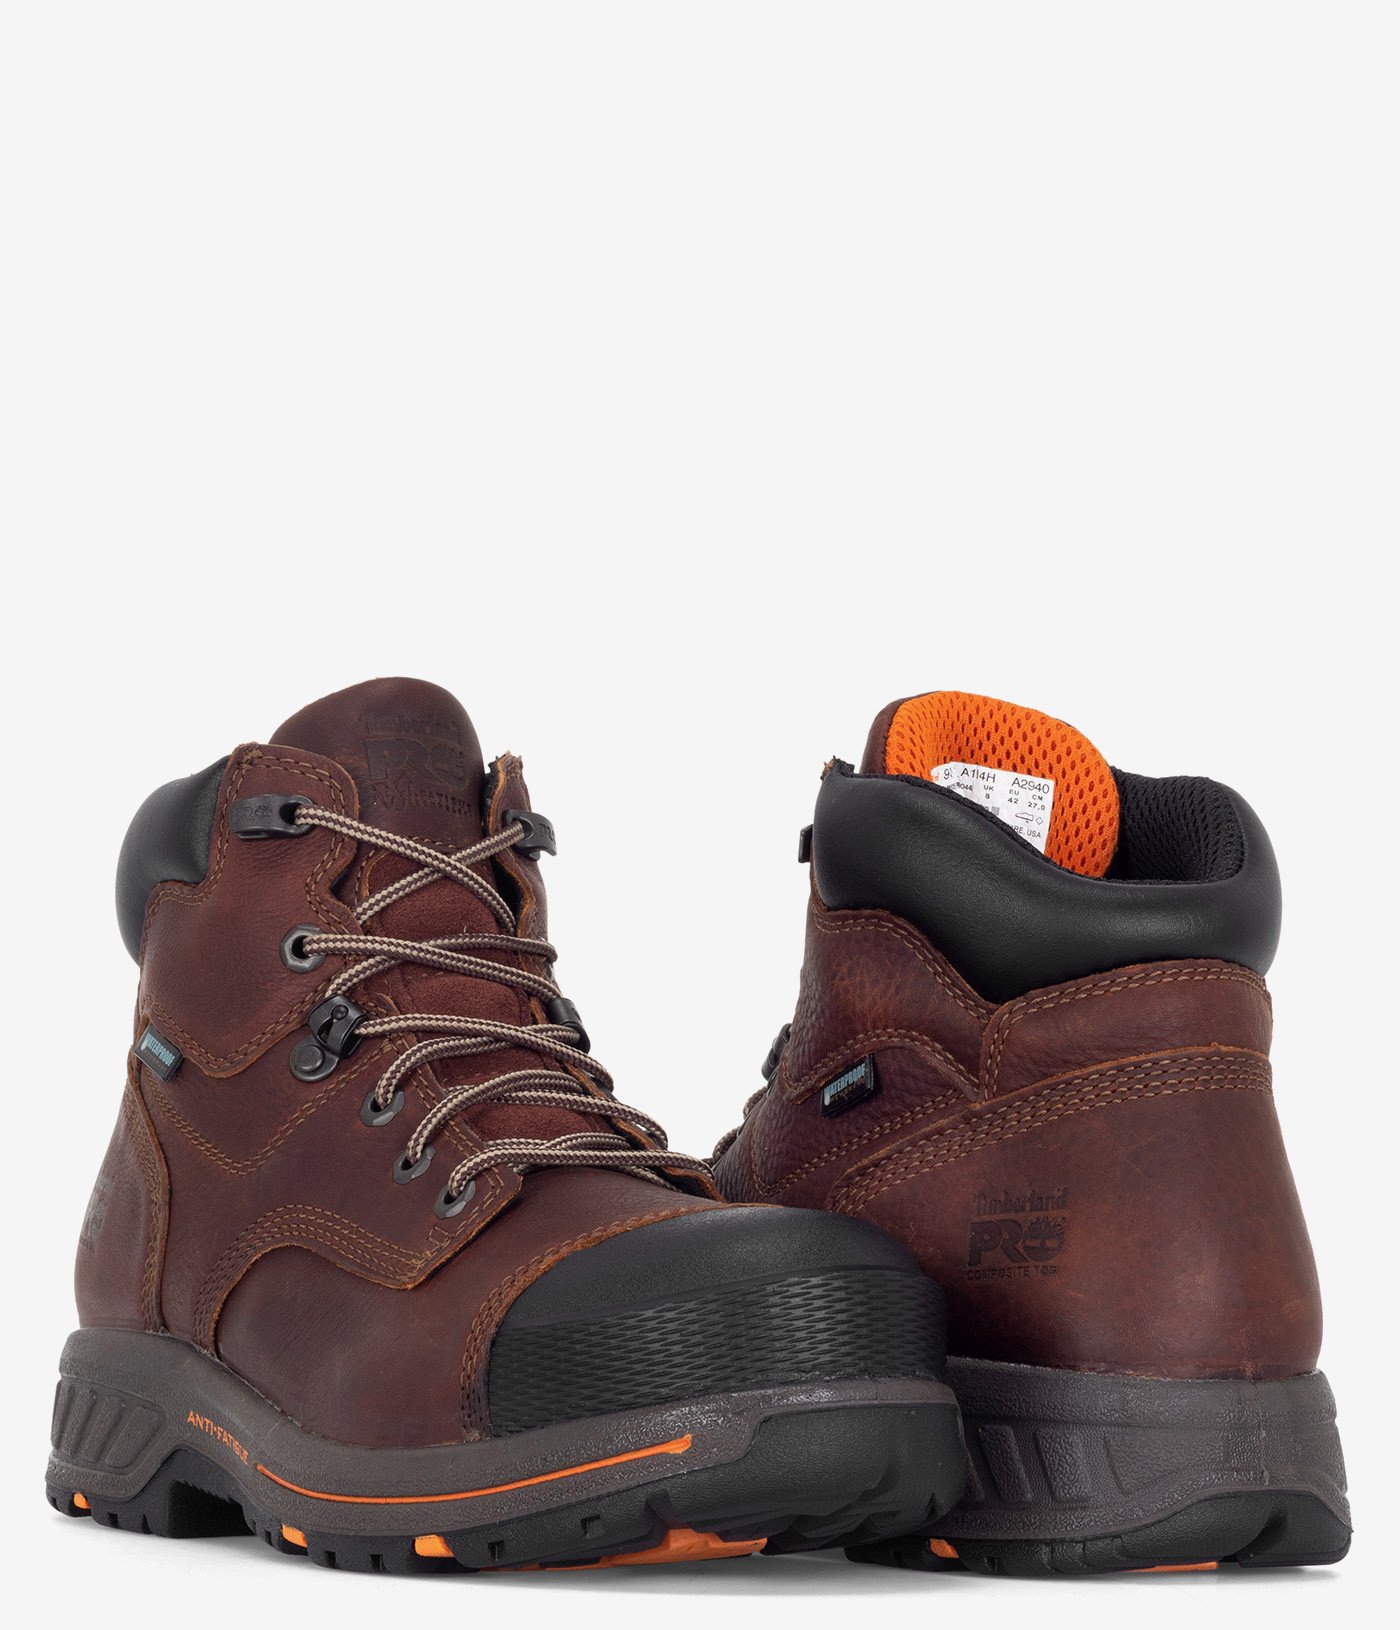 Timberland PRO Helix HD 6” Composite Safety Toe Waterproof EH Work Boot